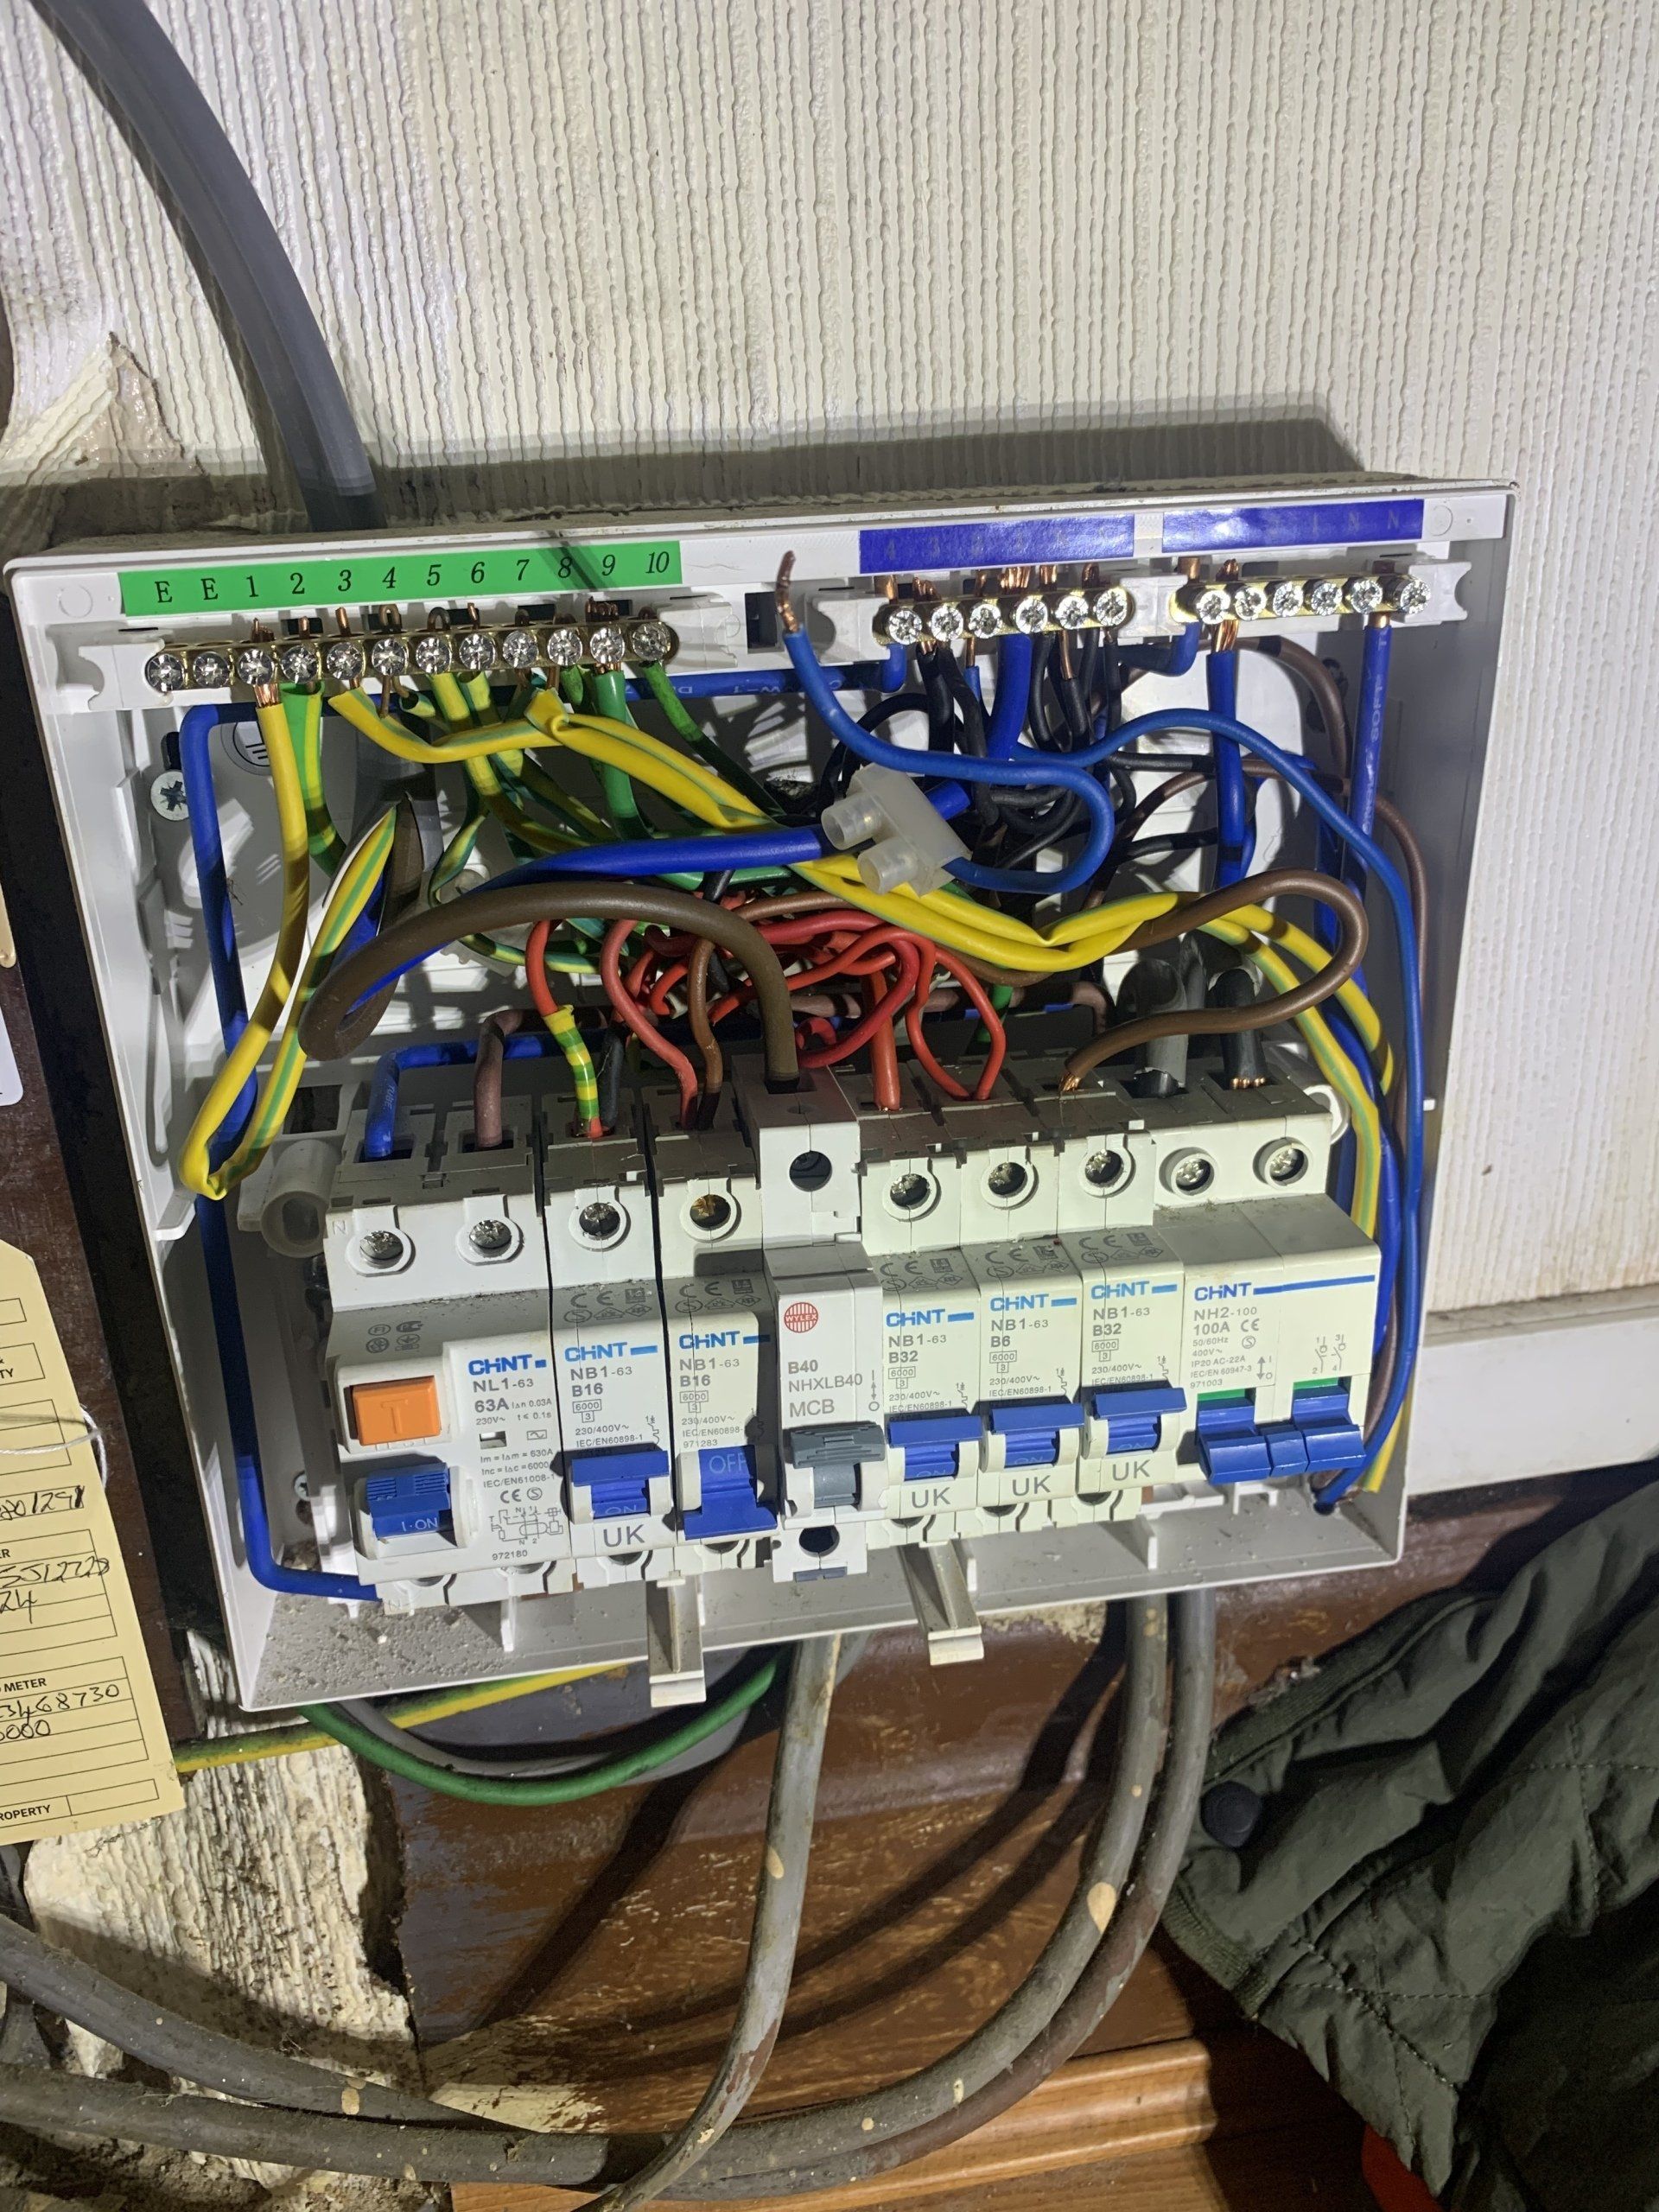 Fuse boards with loose cables. Oversized breakers. Poor installation of a fuse box